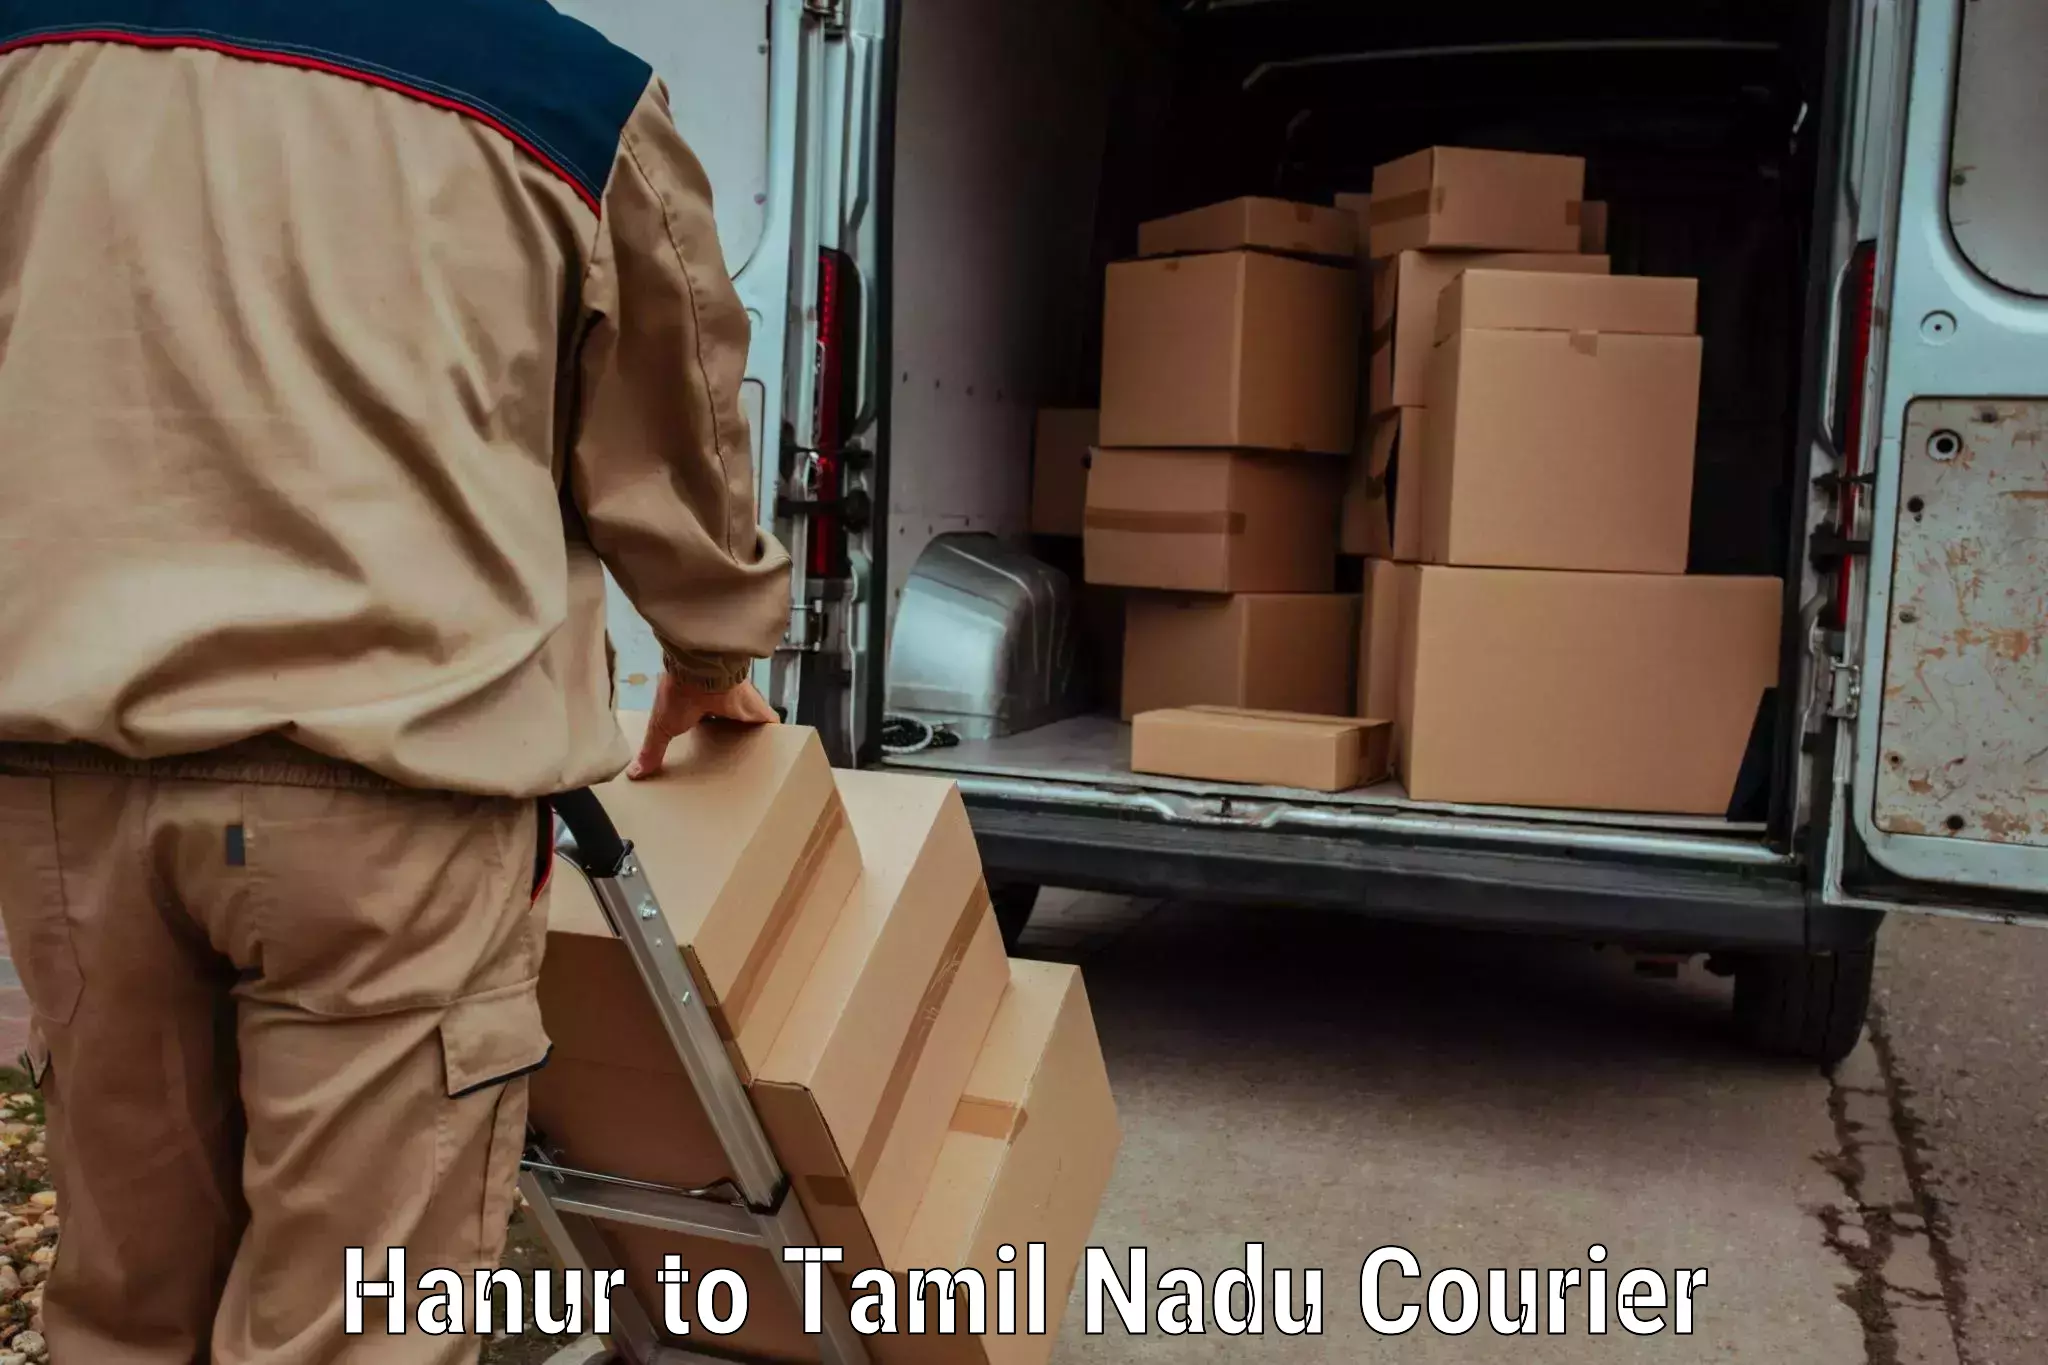 Subscription-based courier Hanur to Tiruppur